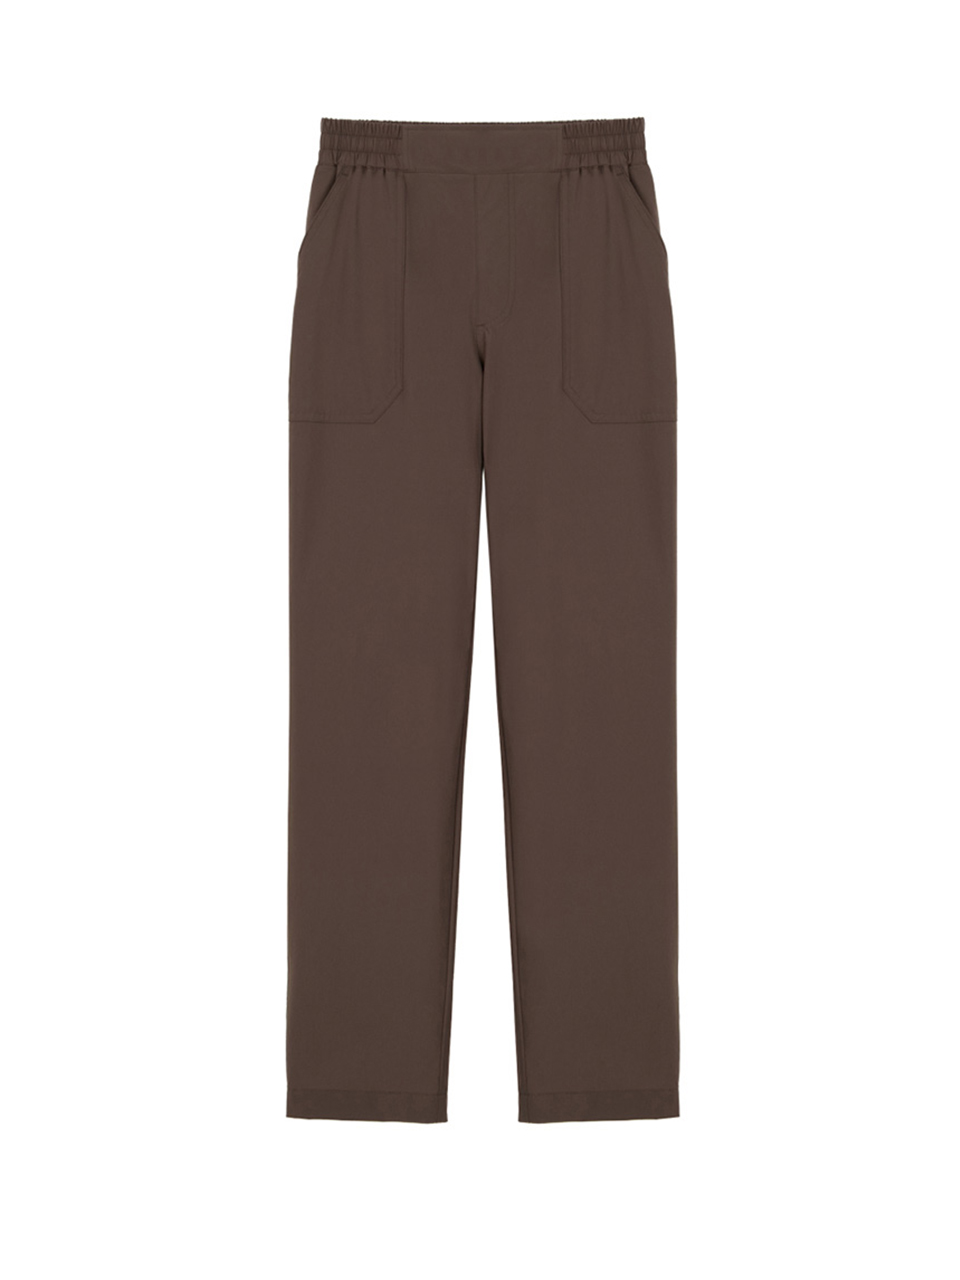 [LIMITED] SUMMER STRETCH SOLID COOL PANTS (FOR WOMAN) - JAVA BROWN